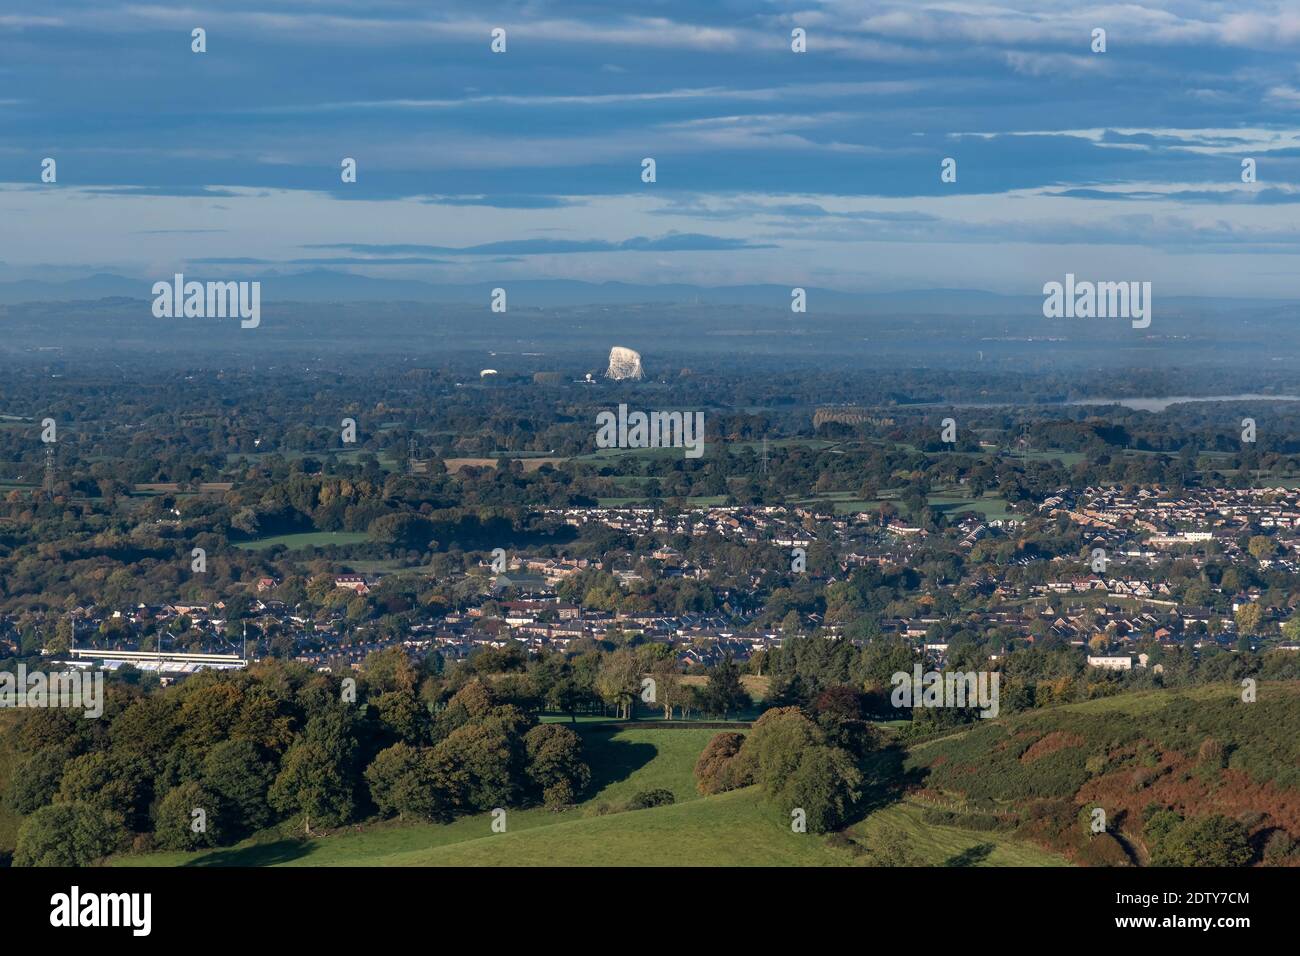 Jodrell Bank, Macclesfield and the Cheshire Plain viewed from Tegg’s Nose, near Macclesfield, Cheshire, England, UK Stock Photo